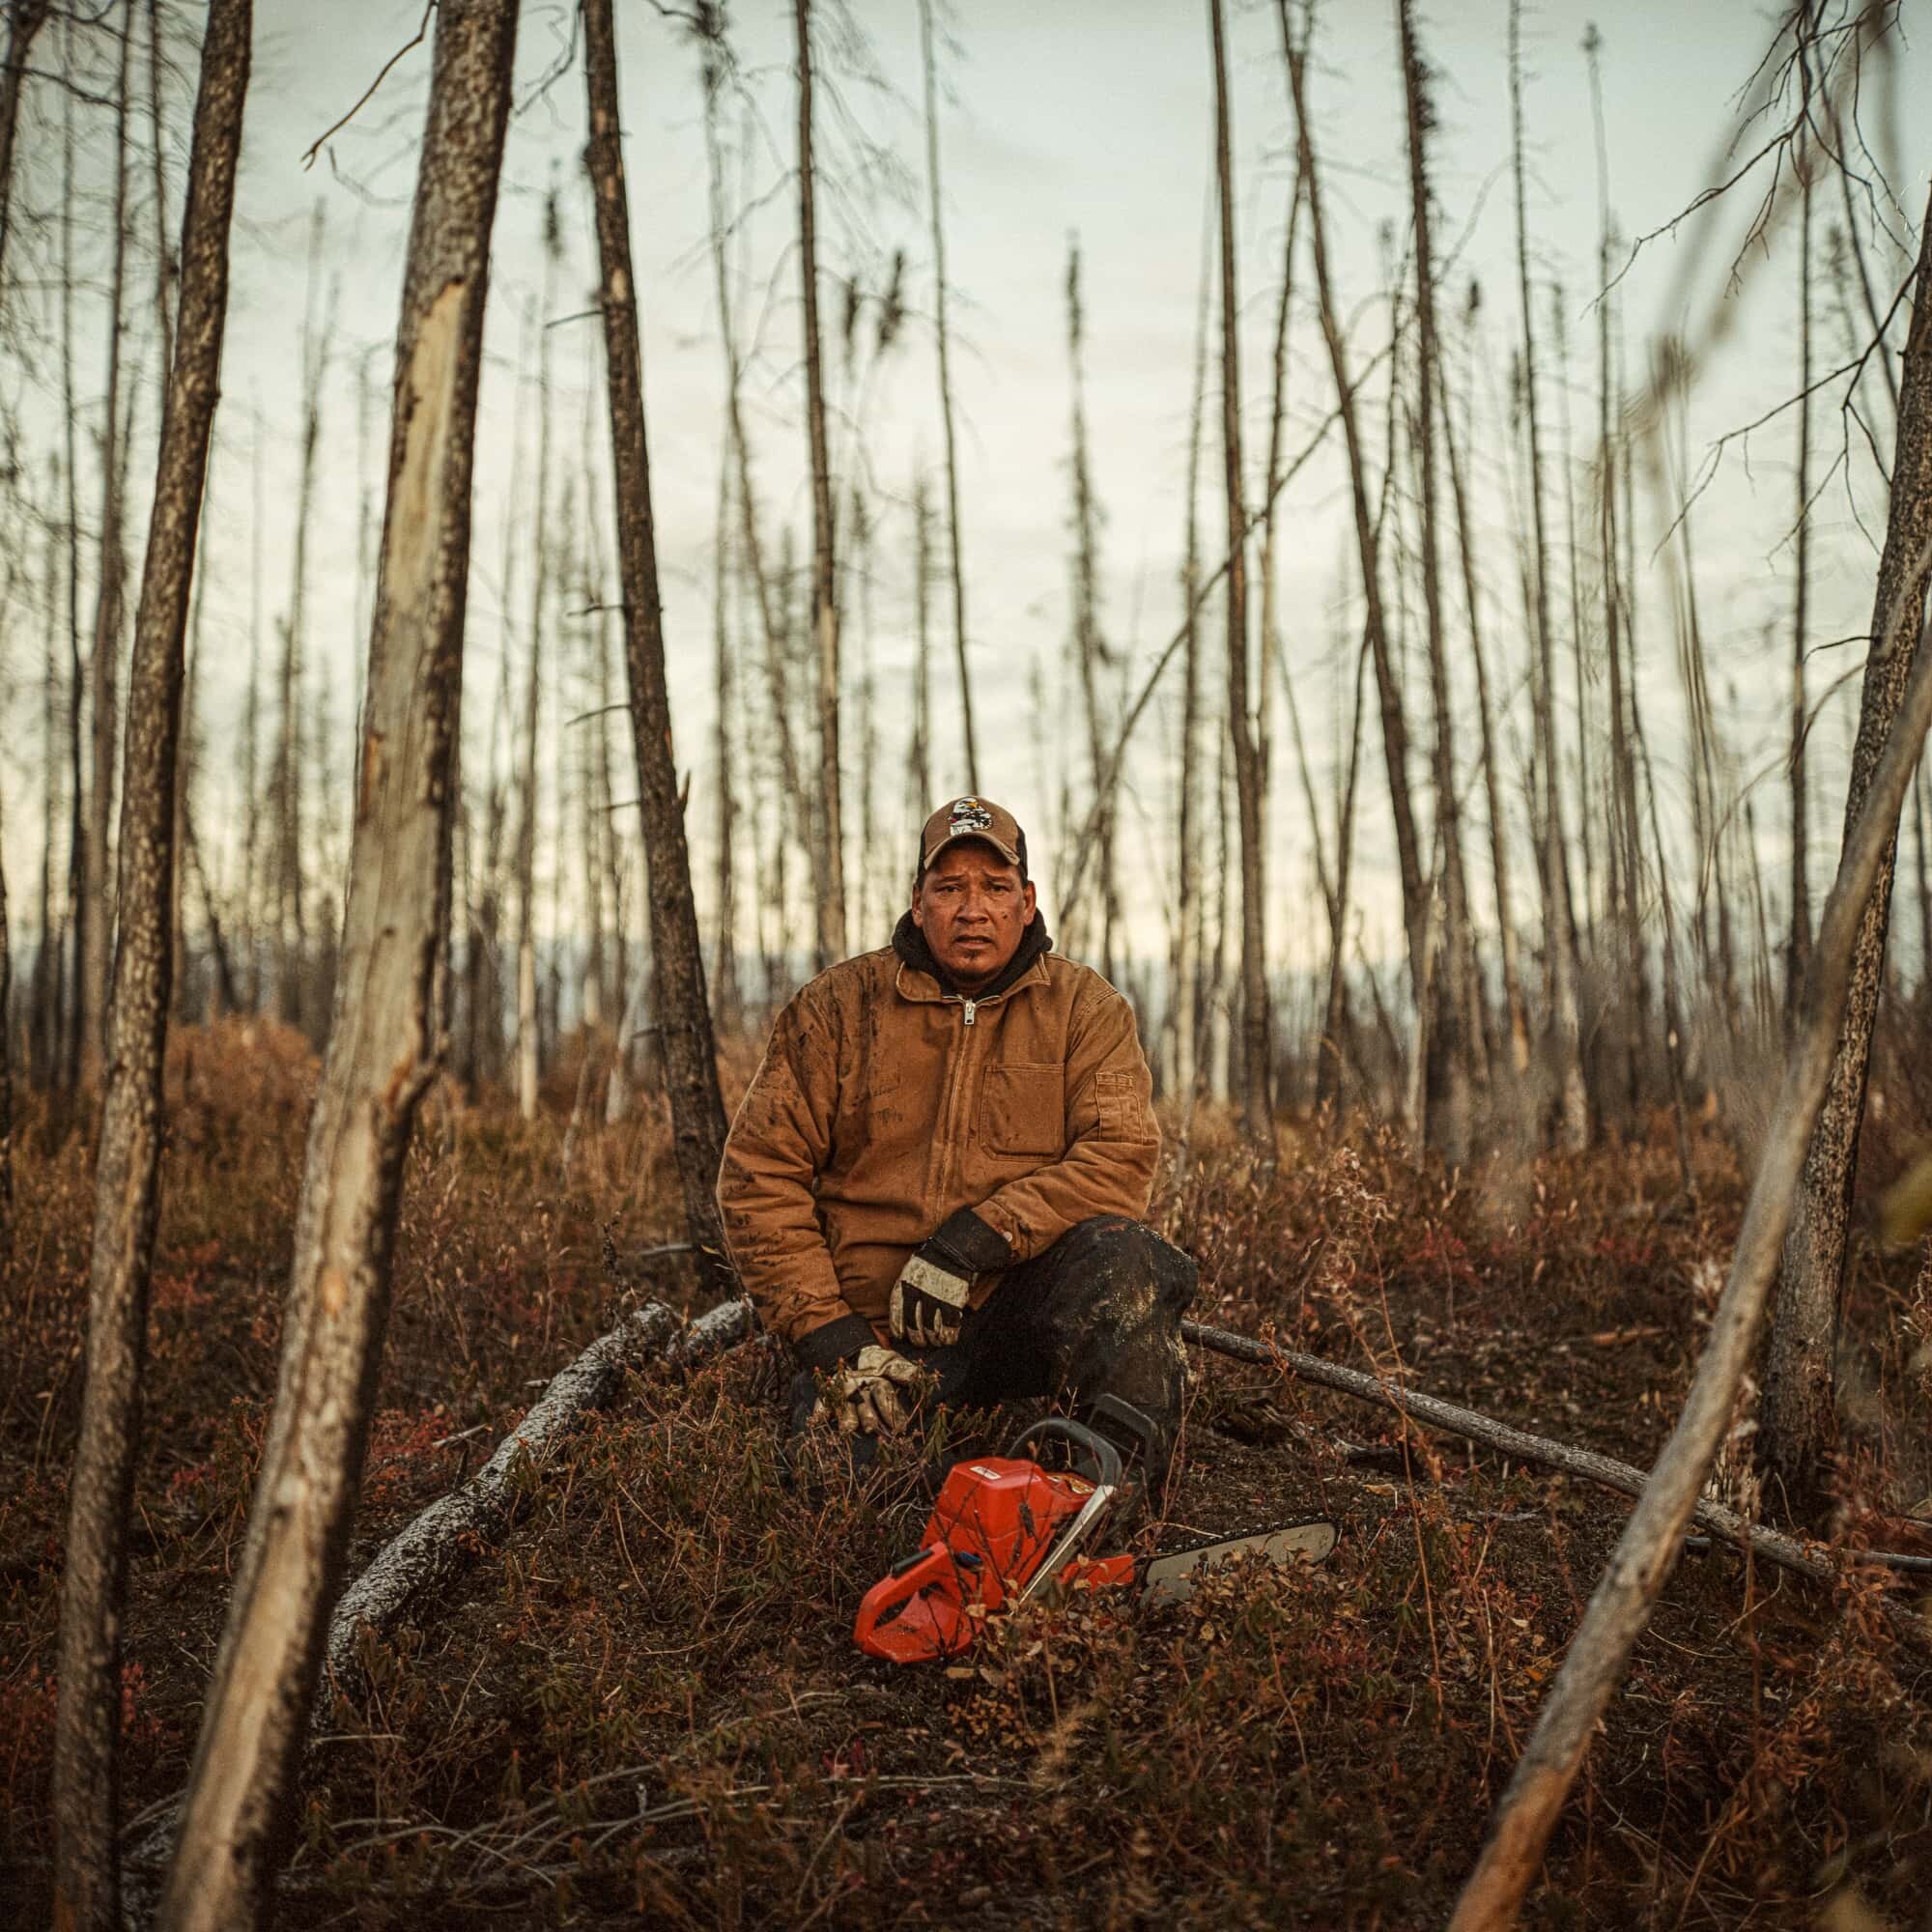 Robert Spence rests while cutting firewood near his trapline on the Churchill River, where he takes his family to hunt moose each fall. Spence is an elected councillor of the Tataskweyak Cree Nation, known as the community of Split Lake. At one time…